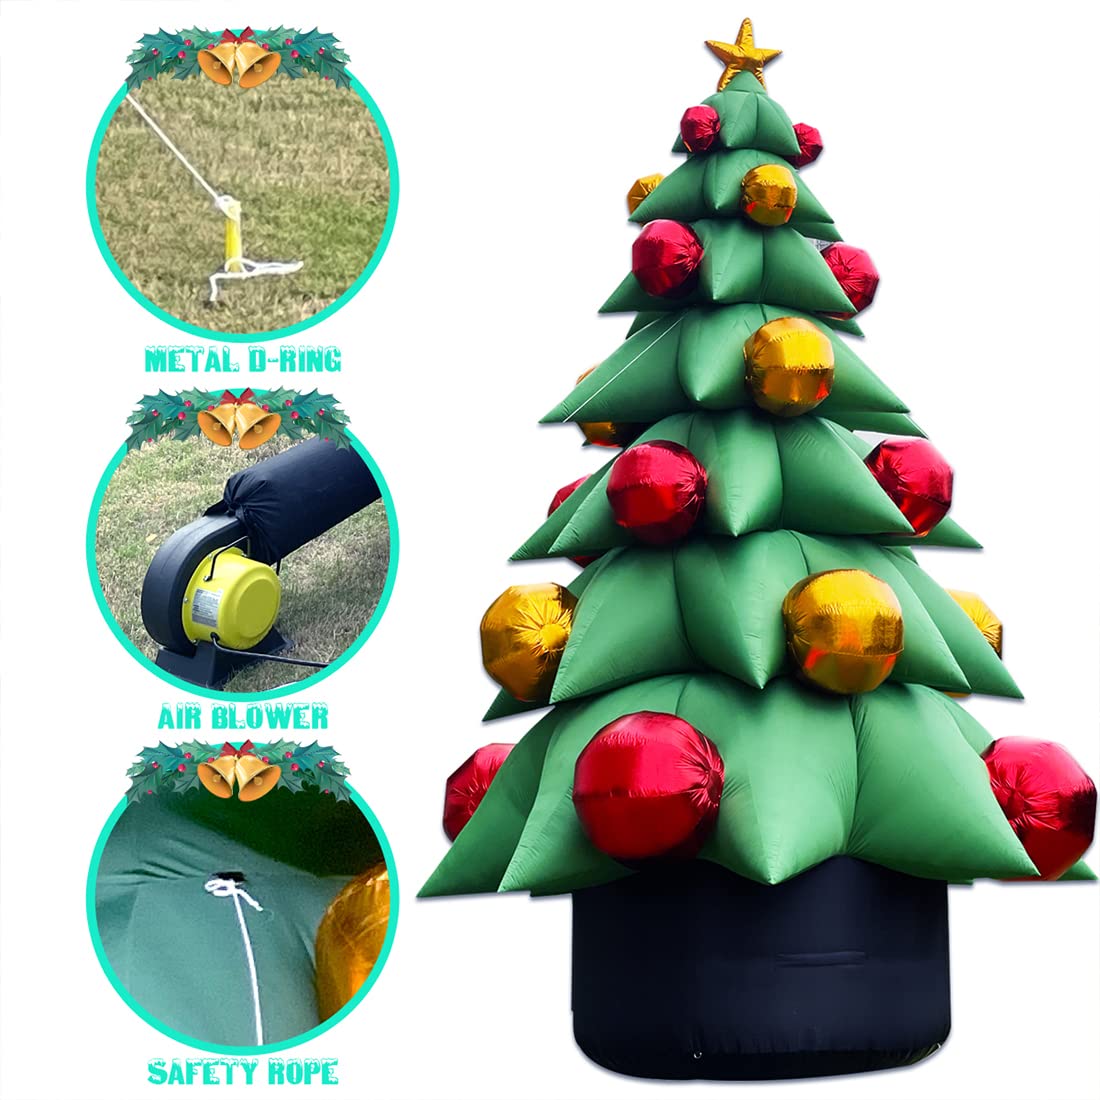 26Ft Tall Inflatable Green Christmas Tree with Multicolor Gift Boxes and Star - Outdoor Indoor Holiday Party Yard Decoration with No Light